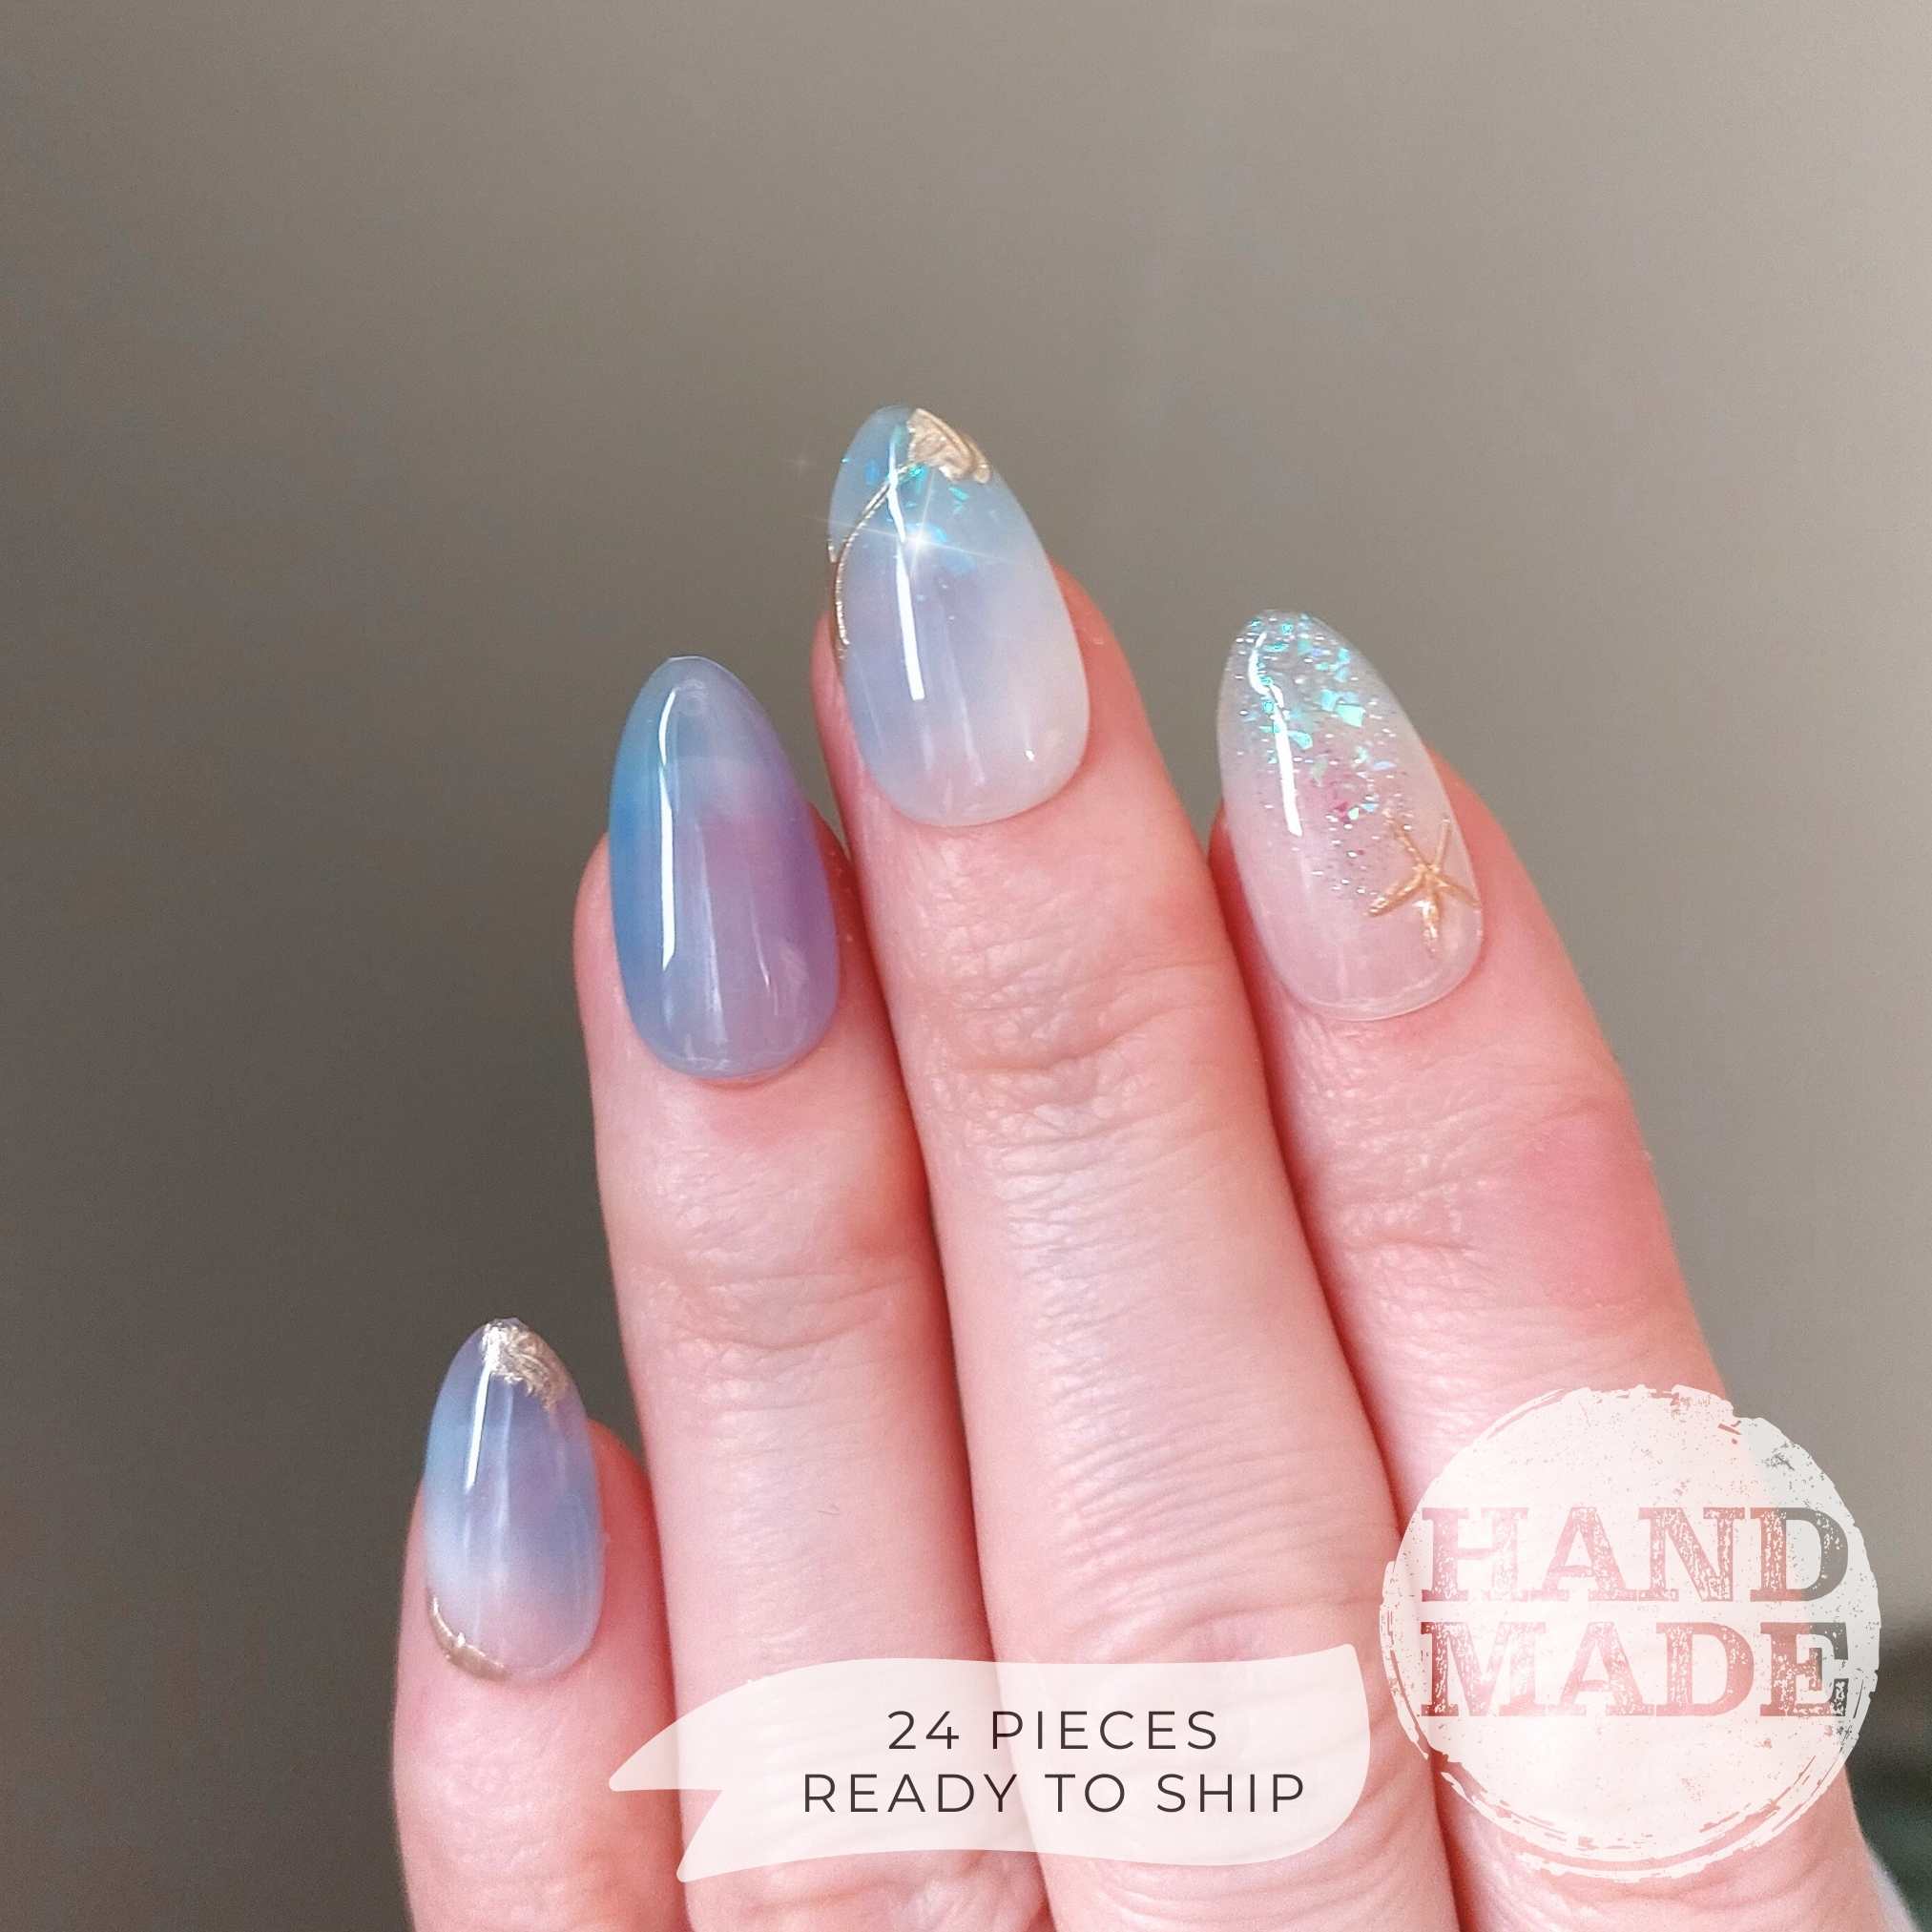 Sea glass ocean nails with starfish, handmade ocean mermaid theme nails from fancyb nails. Short almond press on nails.